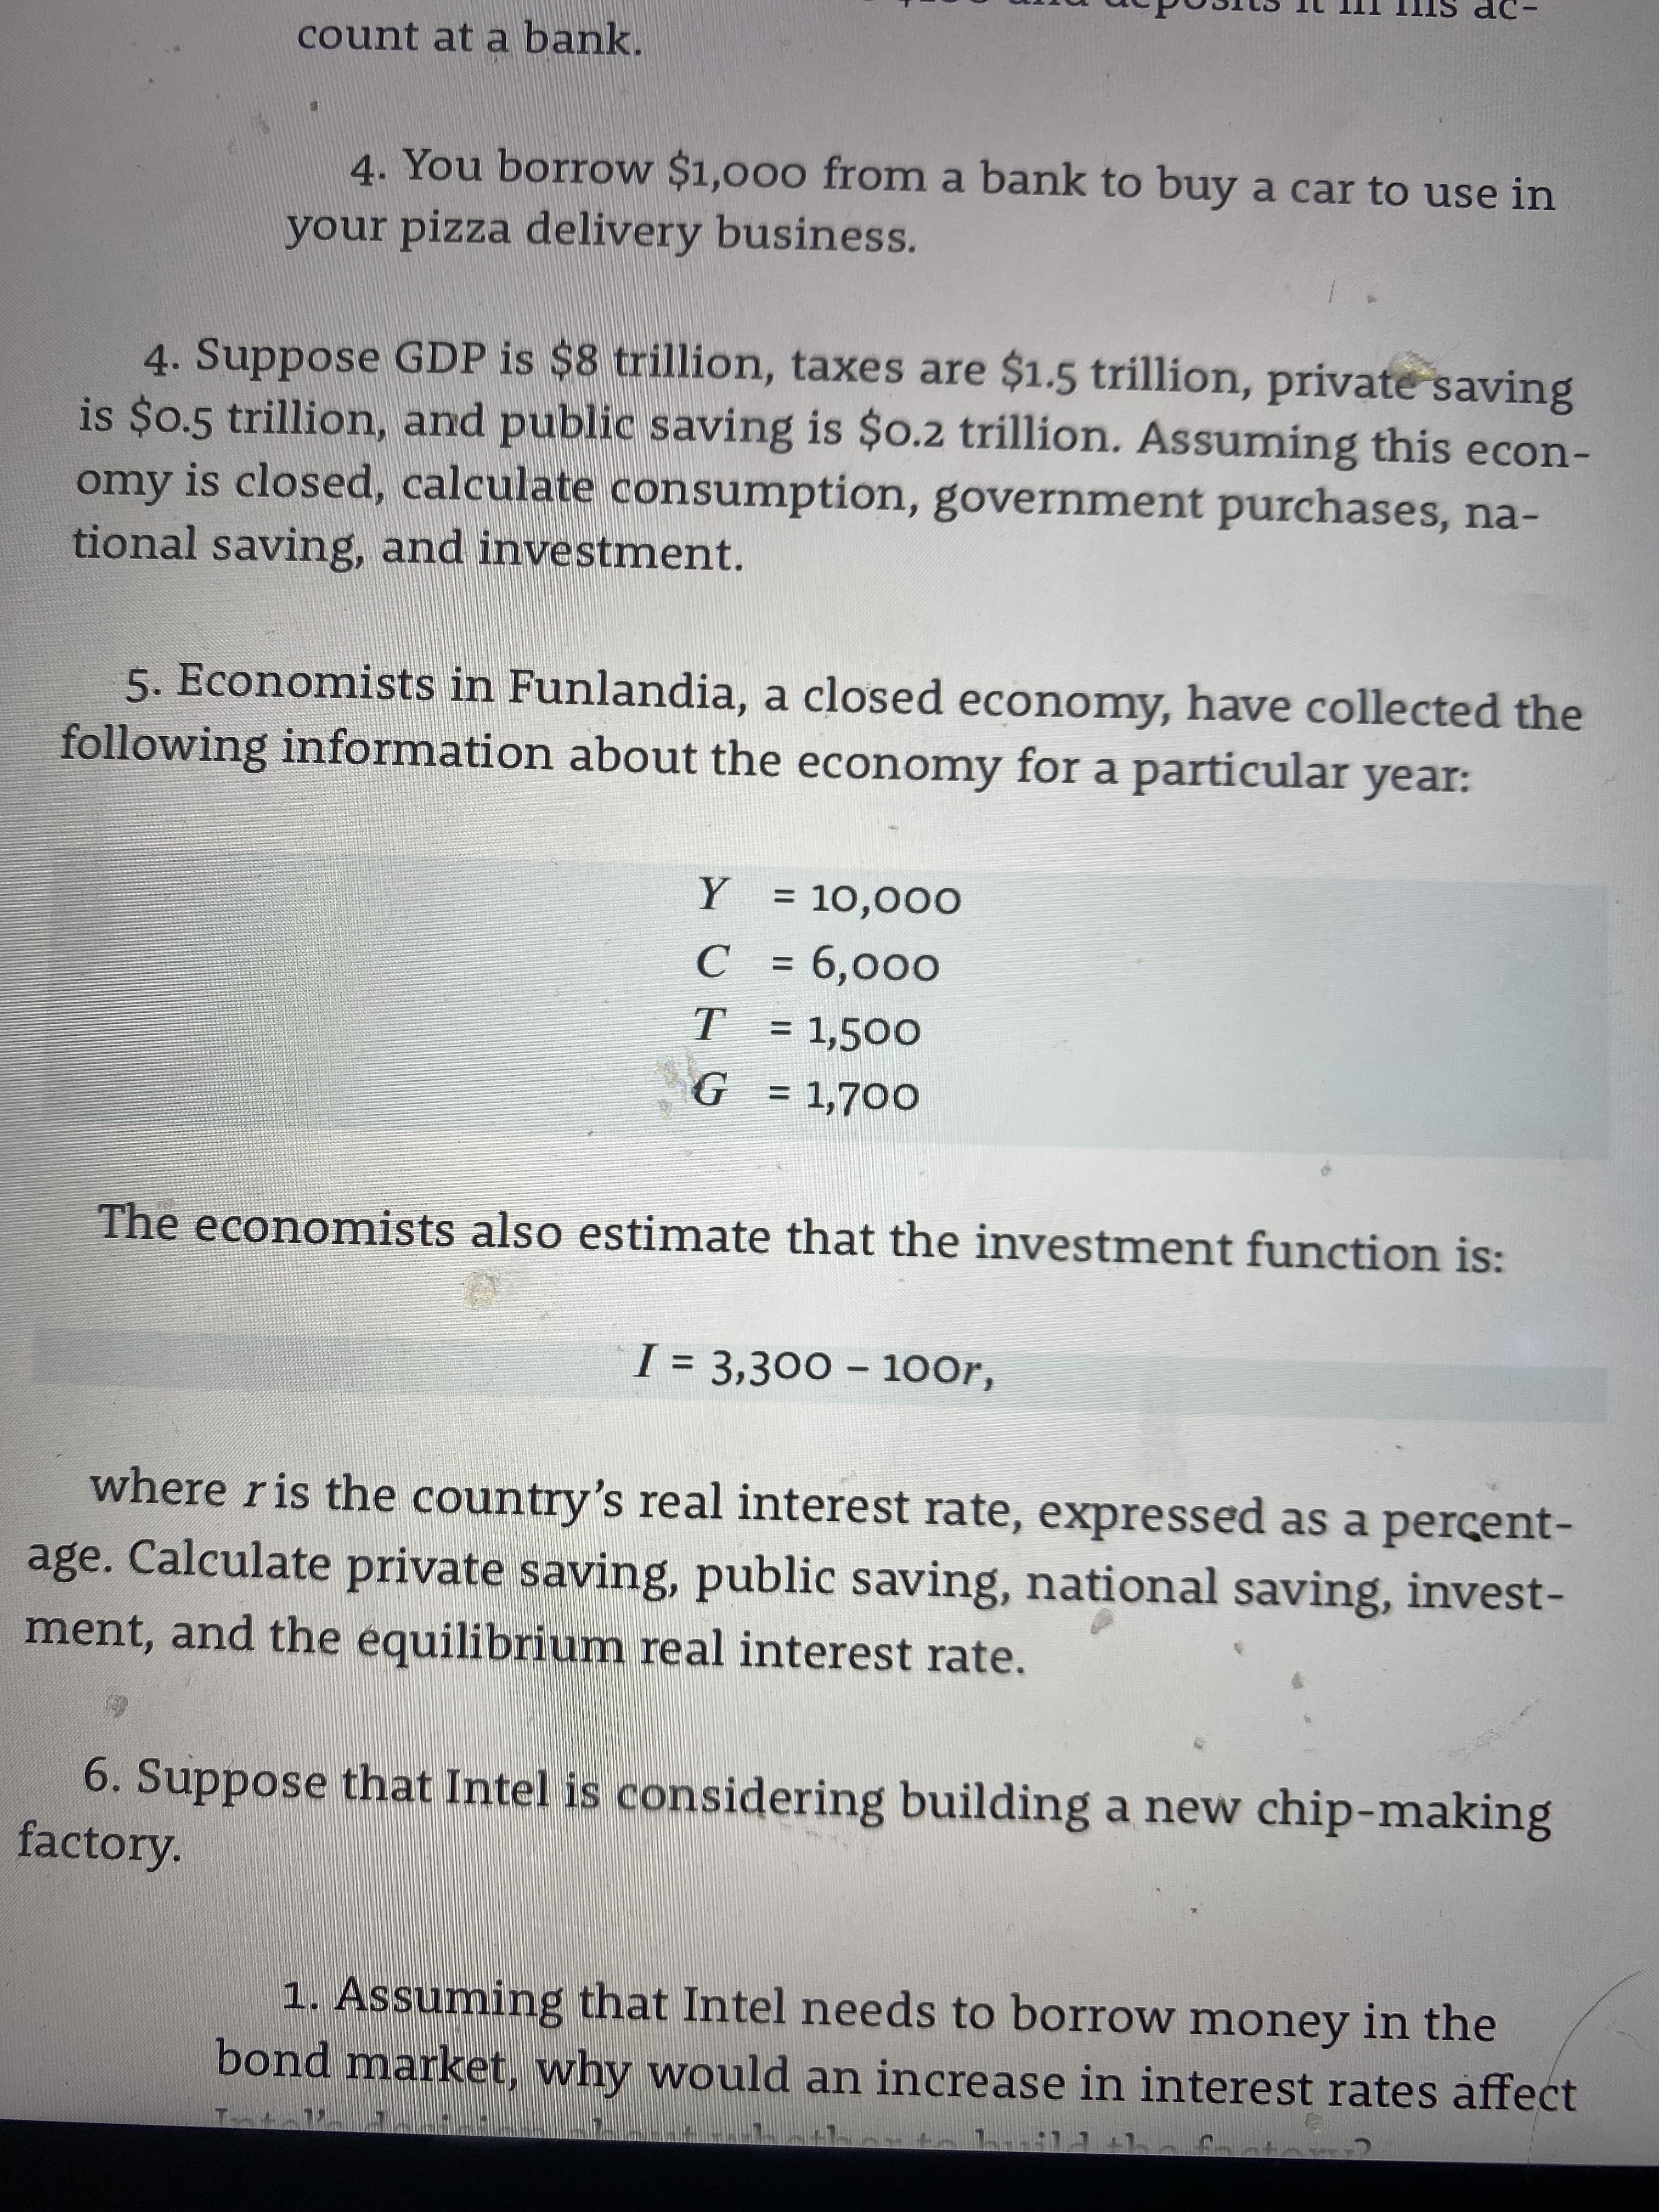 4. Suppose GDP is $8 trillion, taxes are $1.5 trillion, private saving
is $0.5 trillion, and public saving is $0.2 tríllion. Assuming this econ-
omy is closed, calculate consumption, government purchases, na-
tional saving, and investment.
